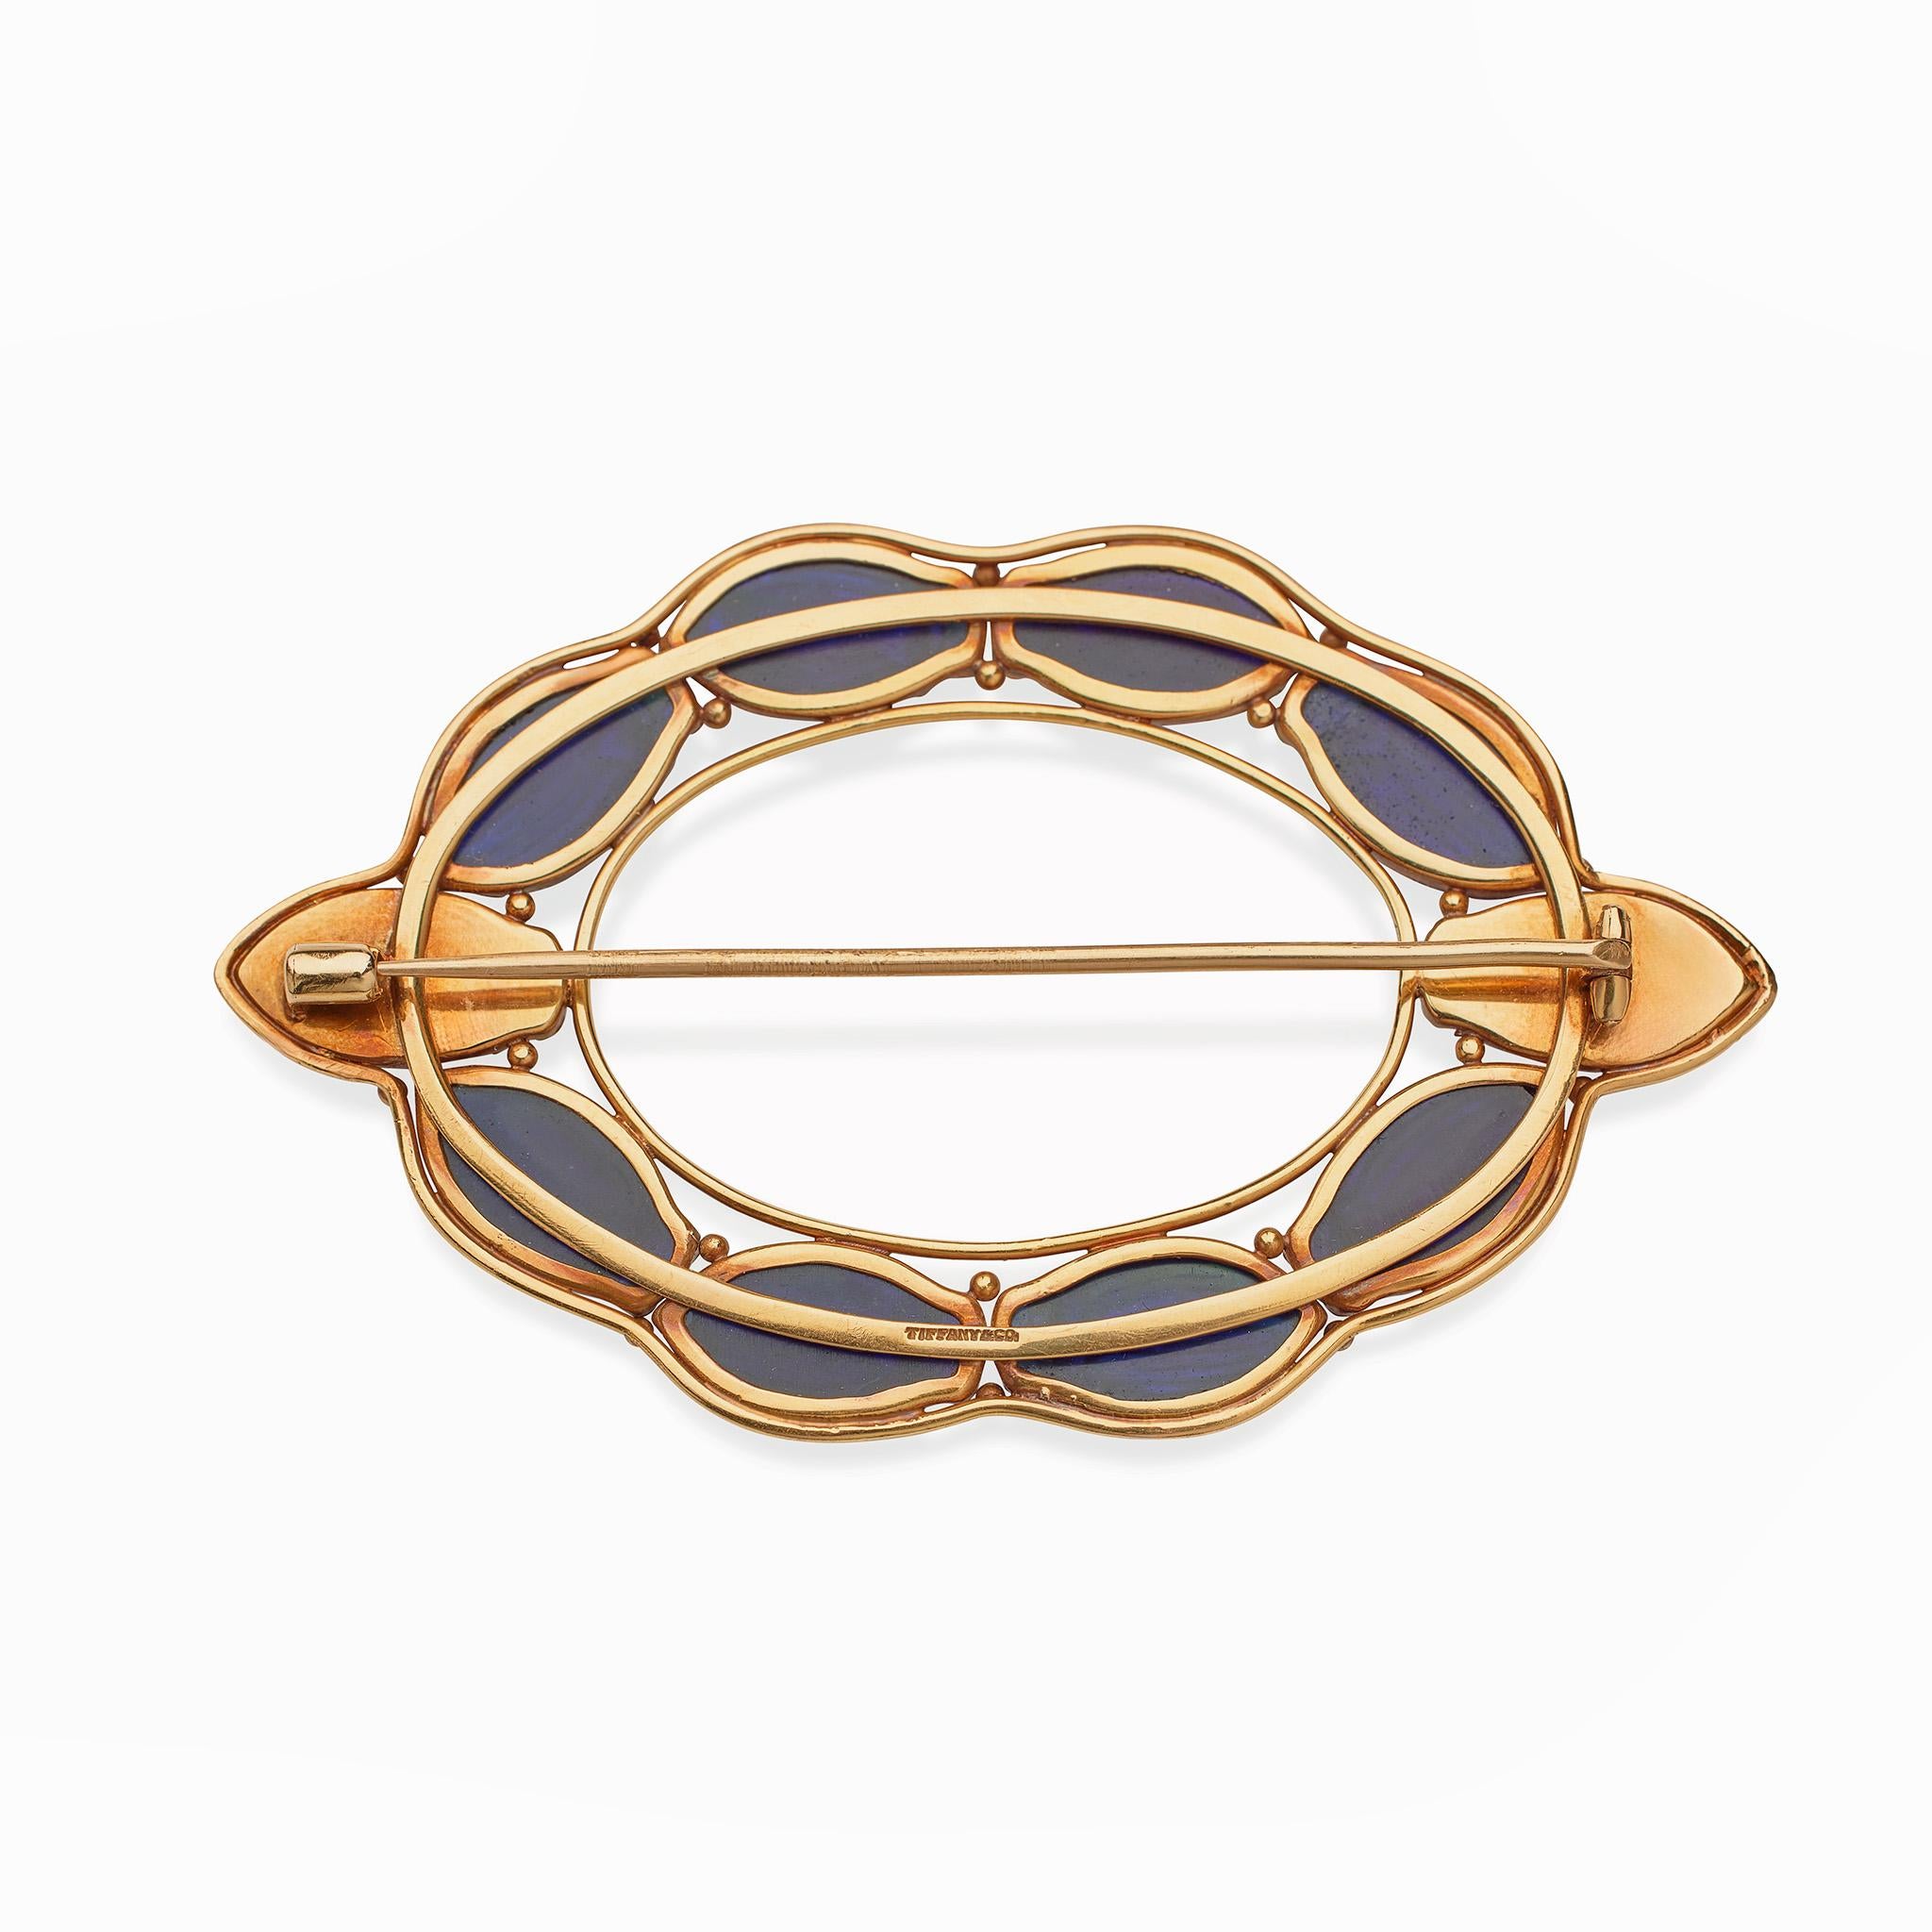 This Louis Tiffany brooch dating from circa 1909 is composed of favrile glass scarabs and gold. The oval form is bezel-set with 10 glass scarabs with iridescent blue, indigo and green tones, within a delicate wire mount highlighted by gold